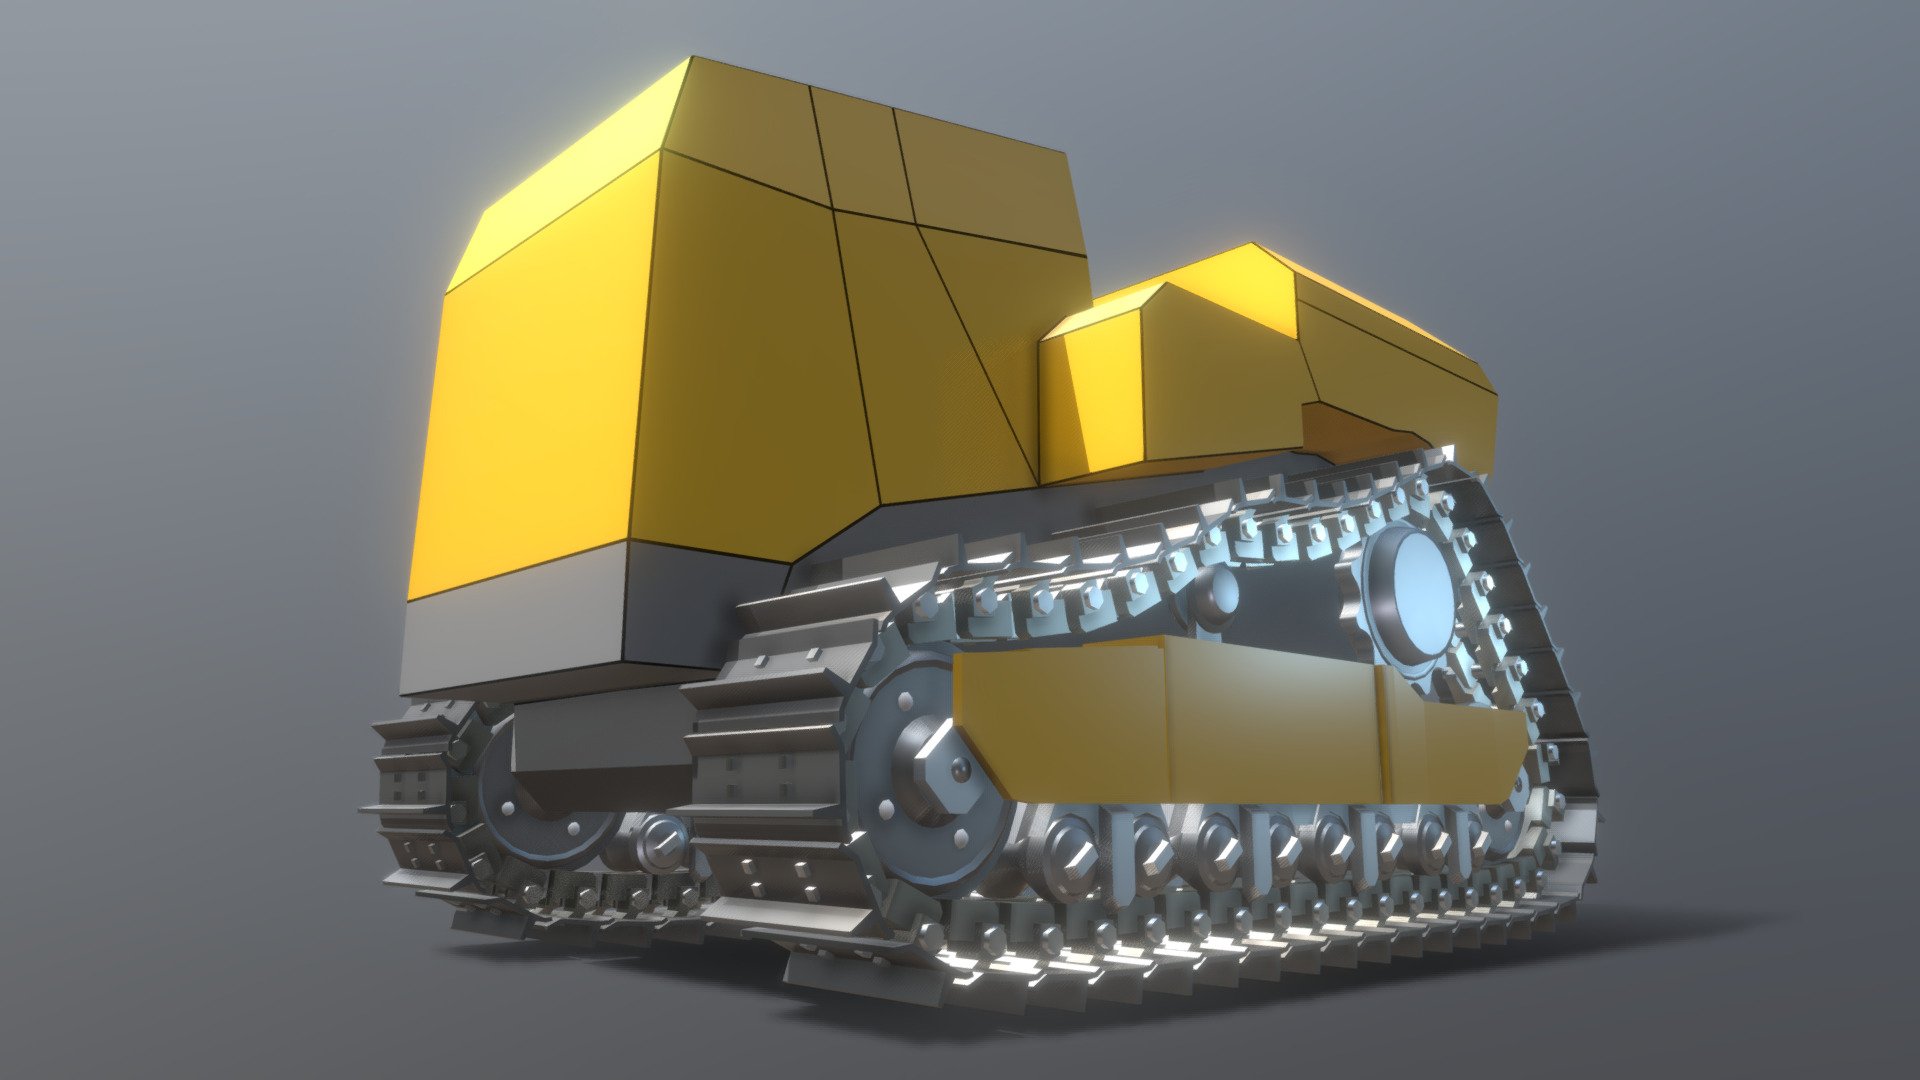 Bulldozer Undercarriage (Wip-3)




I reduced the polygon number from 178.3k to 45k.

The behavior of the chain is smoother now.

Older wips:




Wip-1

Wip-2





Used software and 3d-model creator.

Here on Sketchfab you can see or purchase some of our 3d-models which we are using in our projects for our software VIS-All-3D.

This 3d model or those 3d models as well as the textures were created by 3DHaupt for the software service John GmbH

Modeled and textured with Blender 3D - Bulldozer Undercarriage (Wip-3) - 3D model by VIS-All-3D (@VIS-All) 3d model